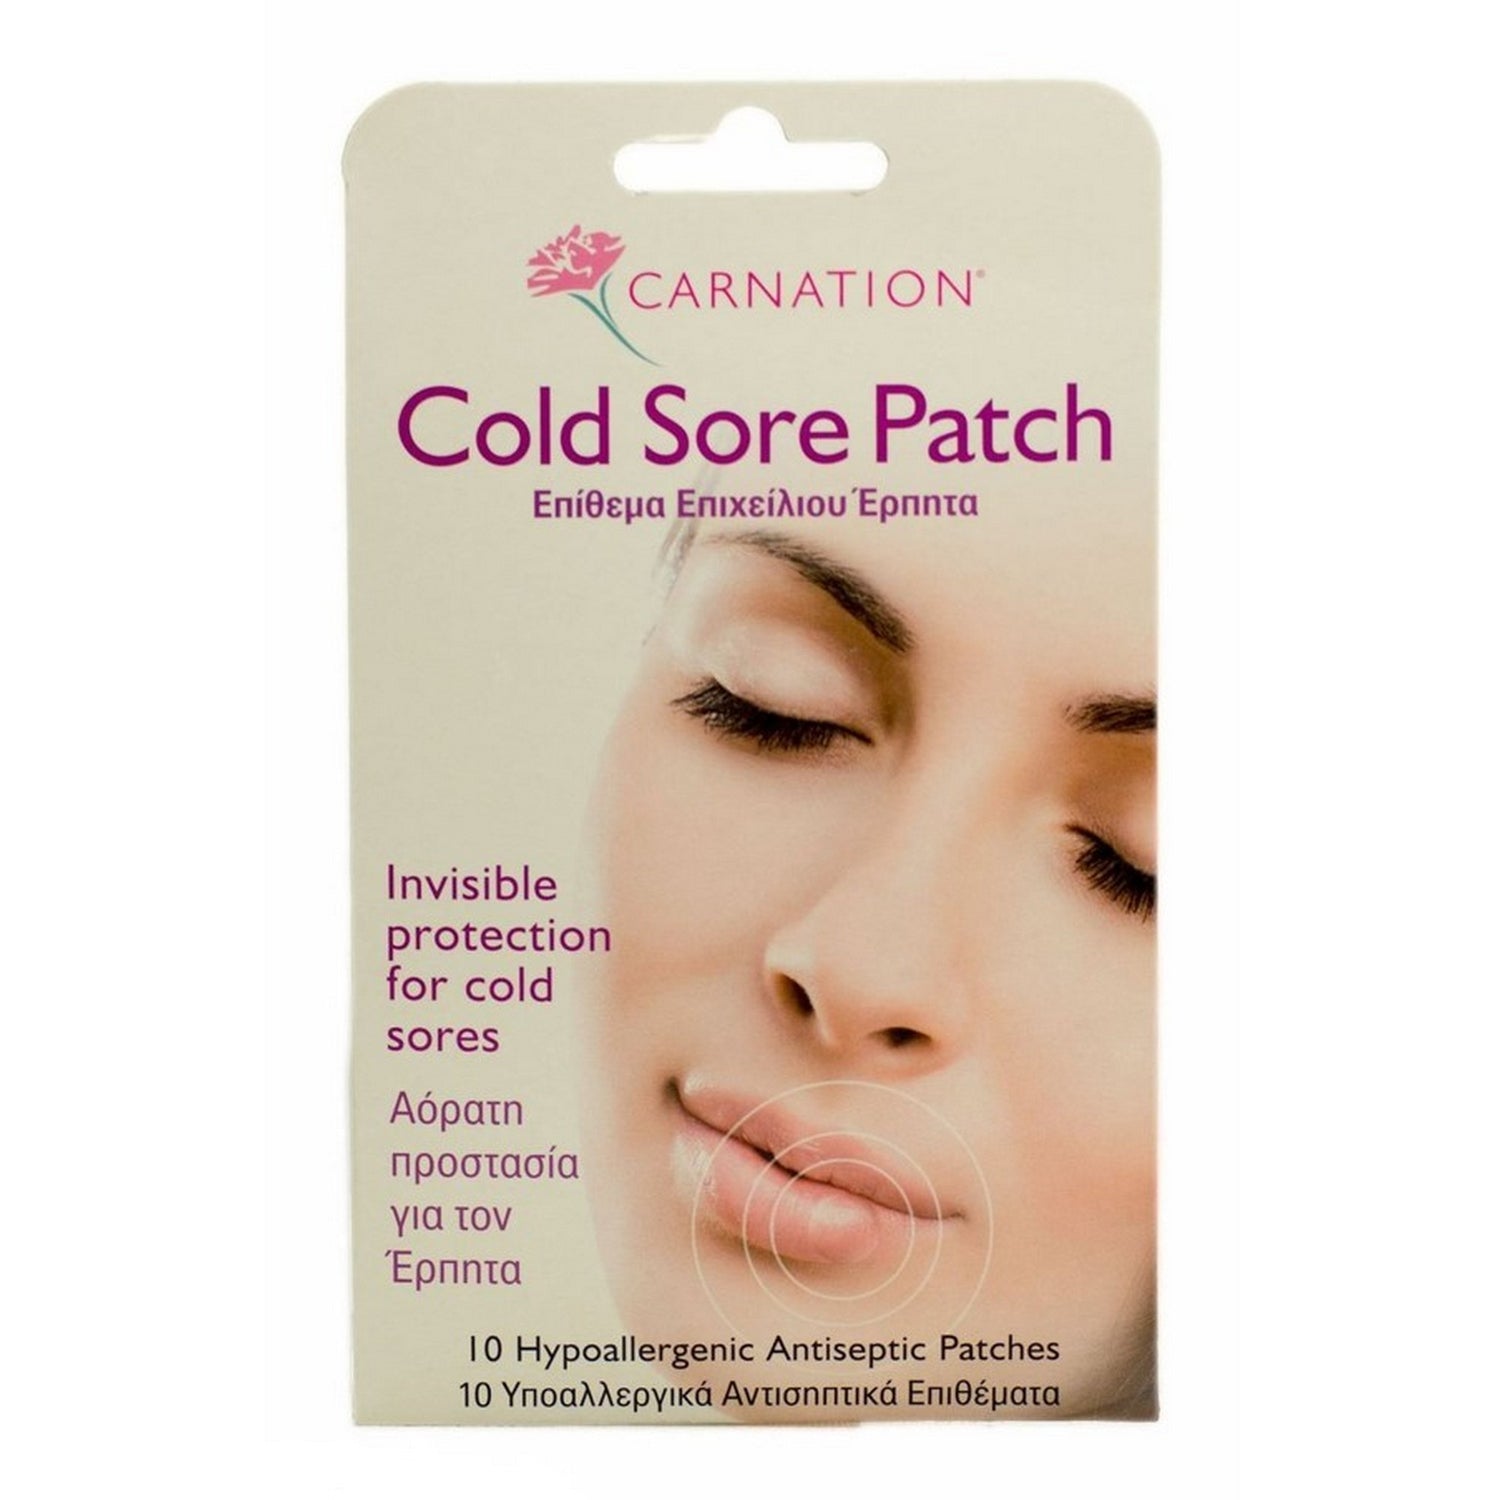 Carnation Cold Sore Patch - 10 Patches